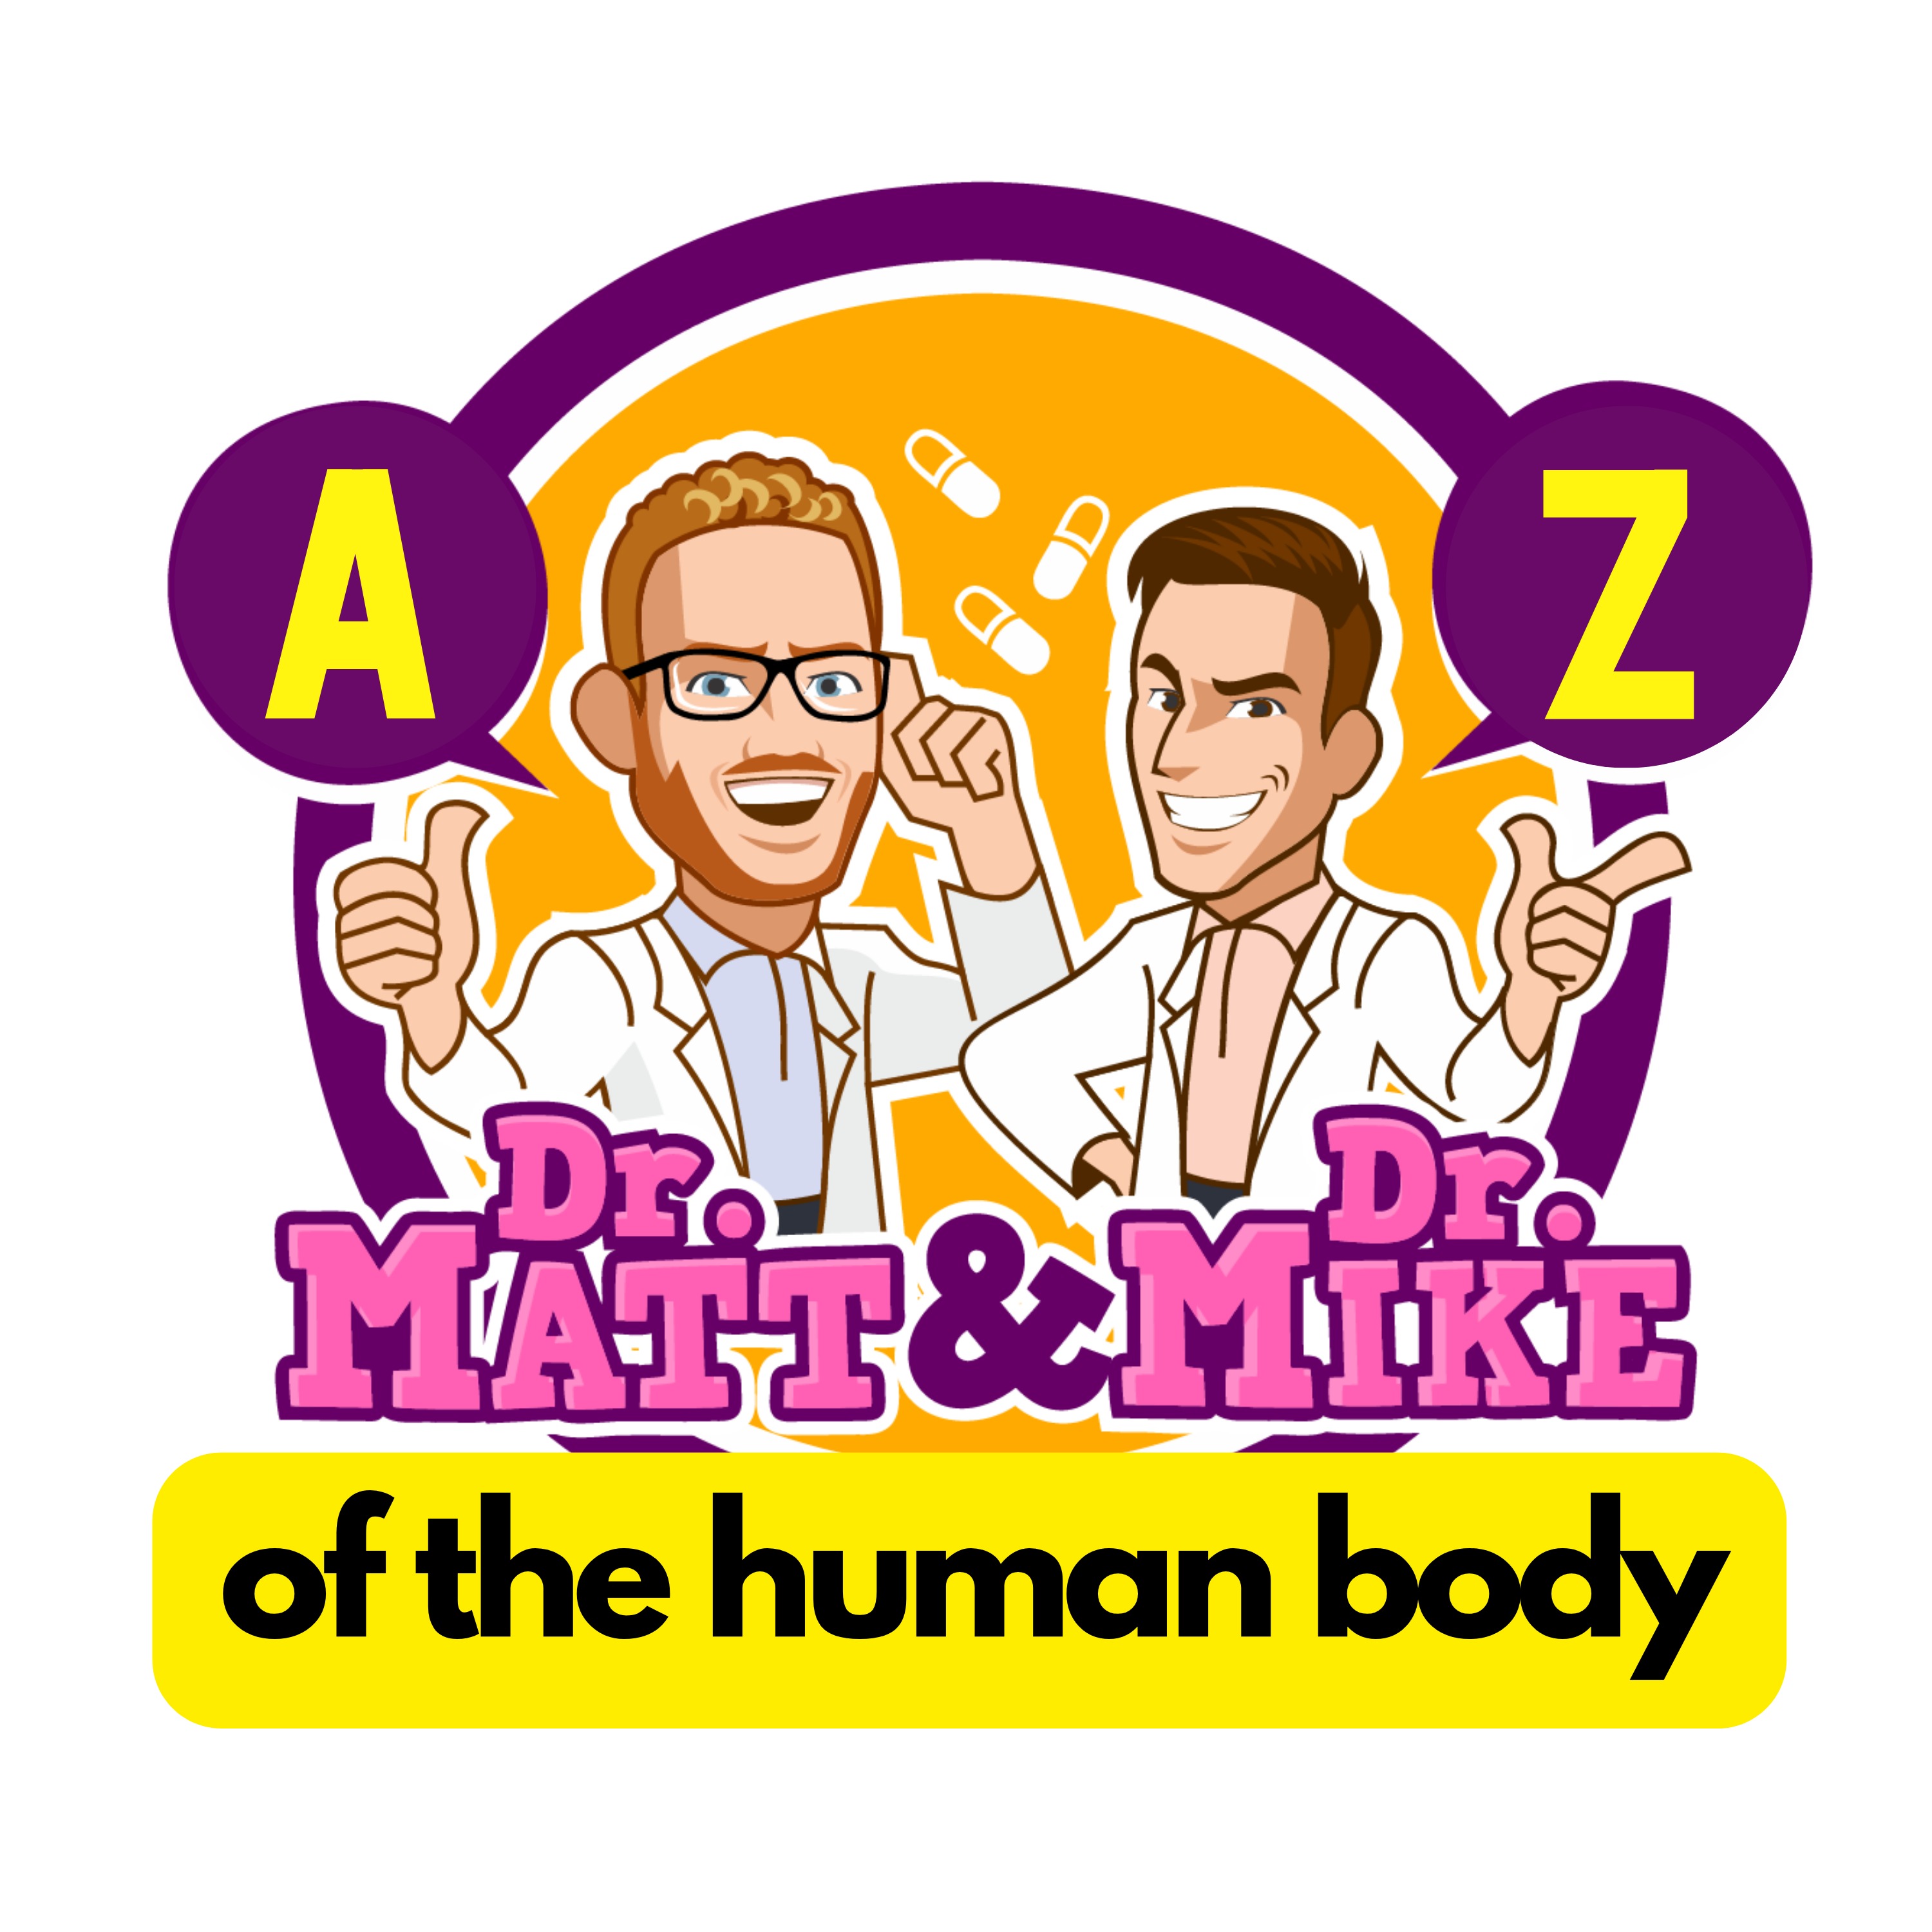 Adrenocorticotropic Hormone (ACTH) | A-Z of the Human Body